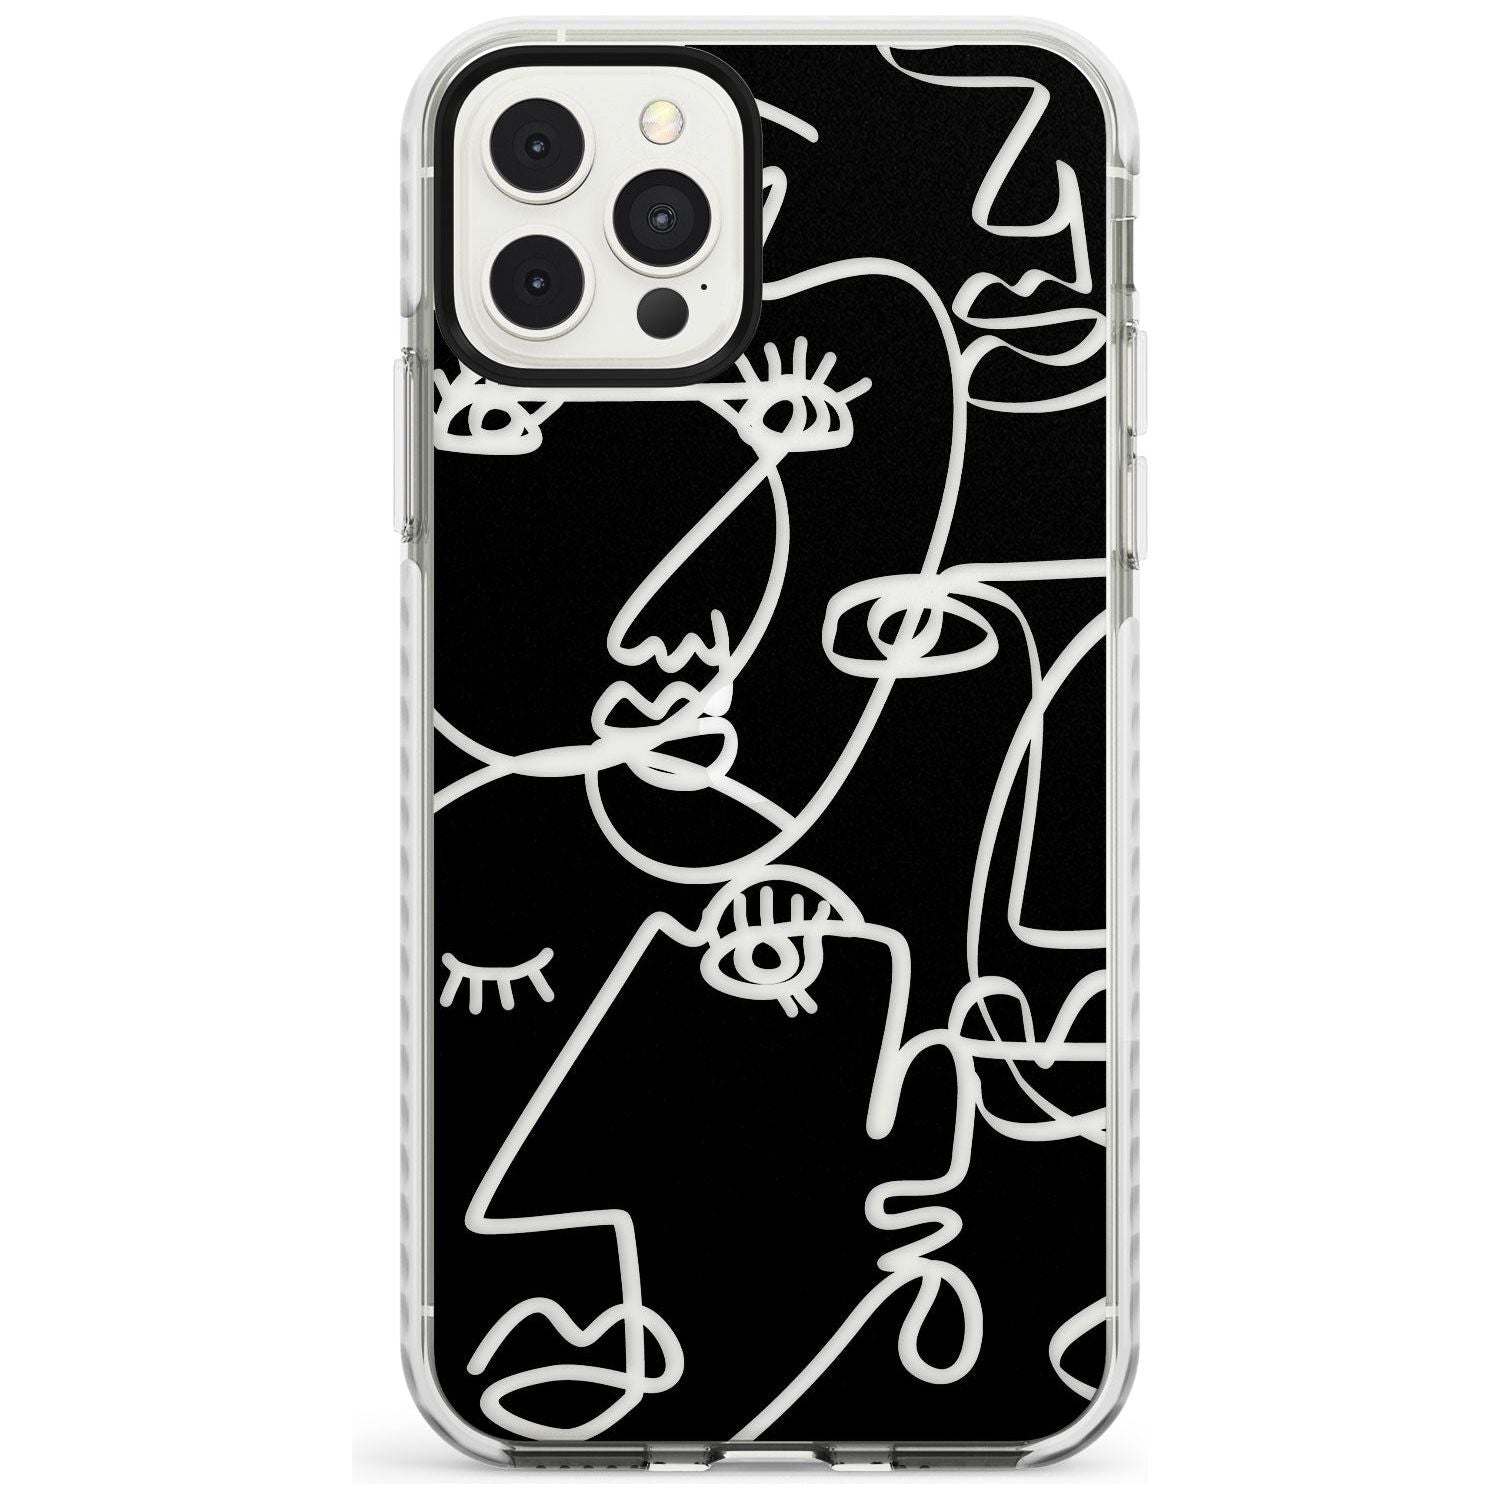 Continuous Line Faces: Clear on Black Slim TPU Phone Case for iPhone 11 Pro Max